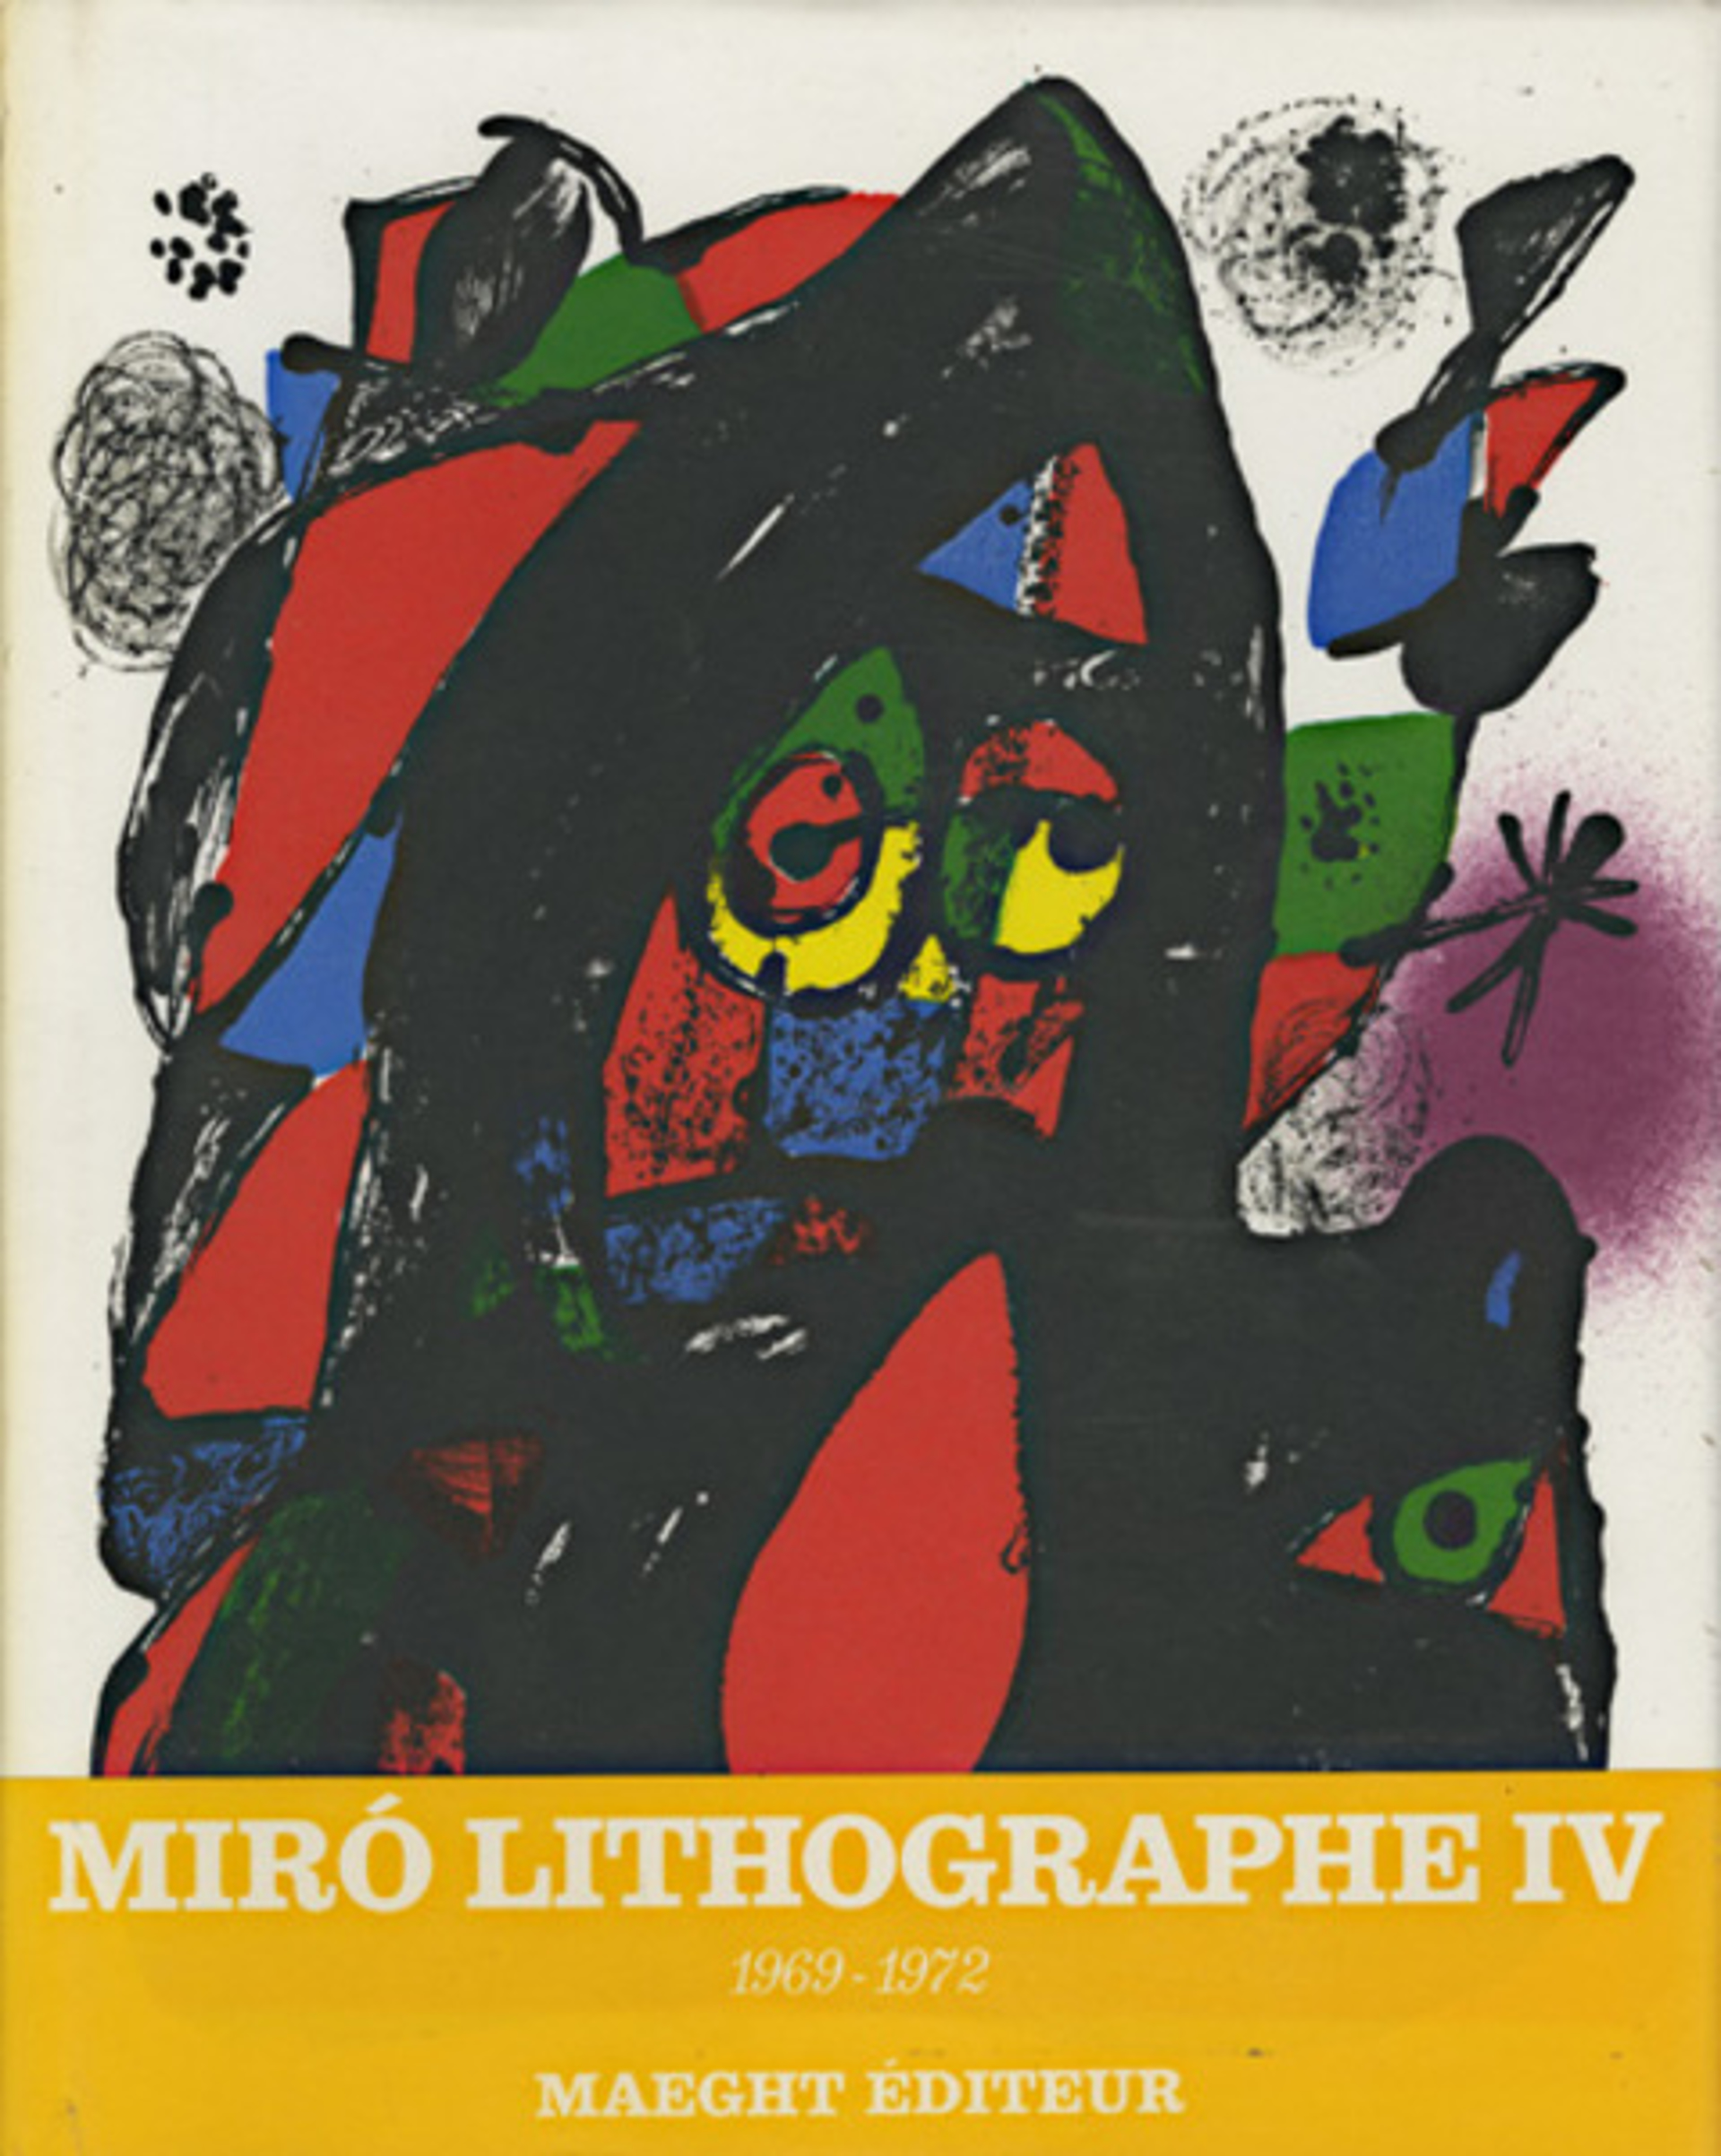 Lithography, Volume 4 1969-1972 contains 6 original lithos, Ed. of 5M copies by Joan Miró